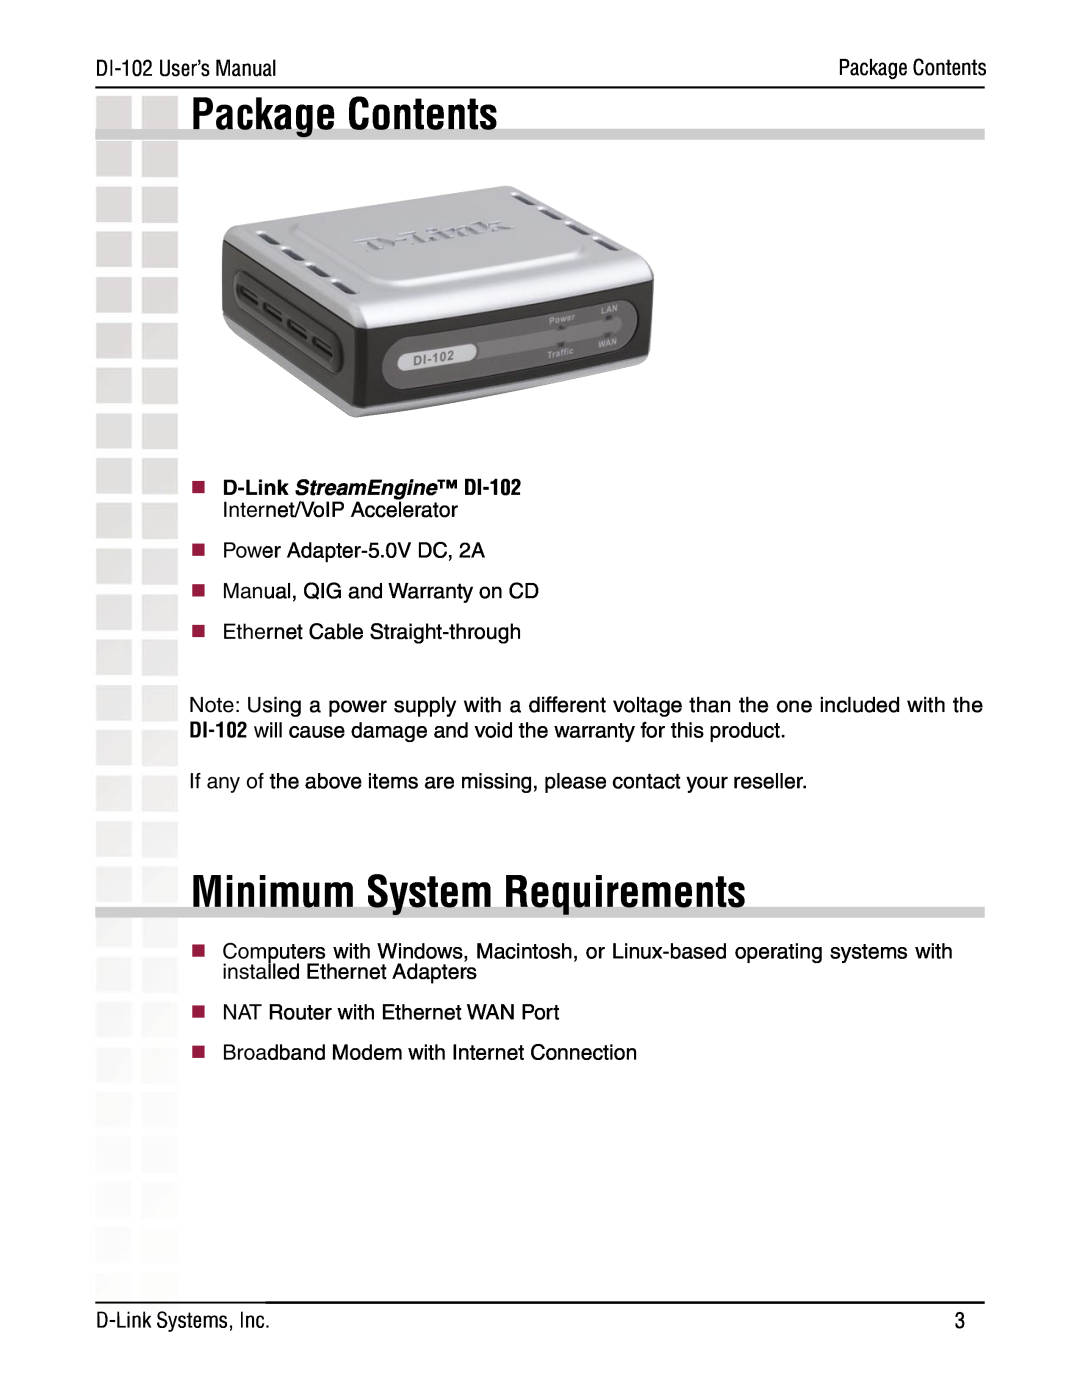 D-Link Internet/VoIP Accelerator, DI-102 manual Package Contents, Minimum System Requirements 